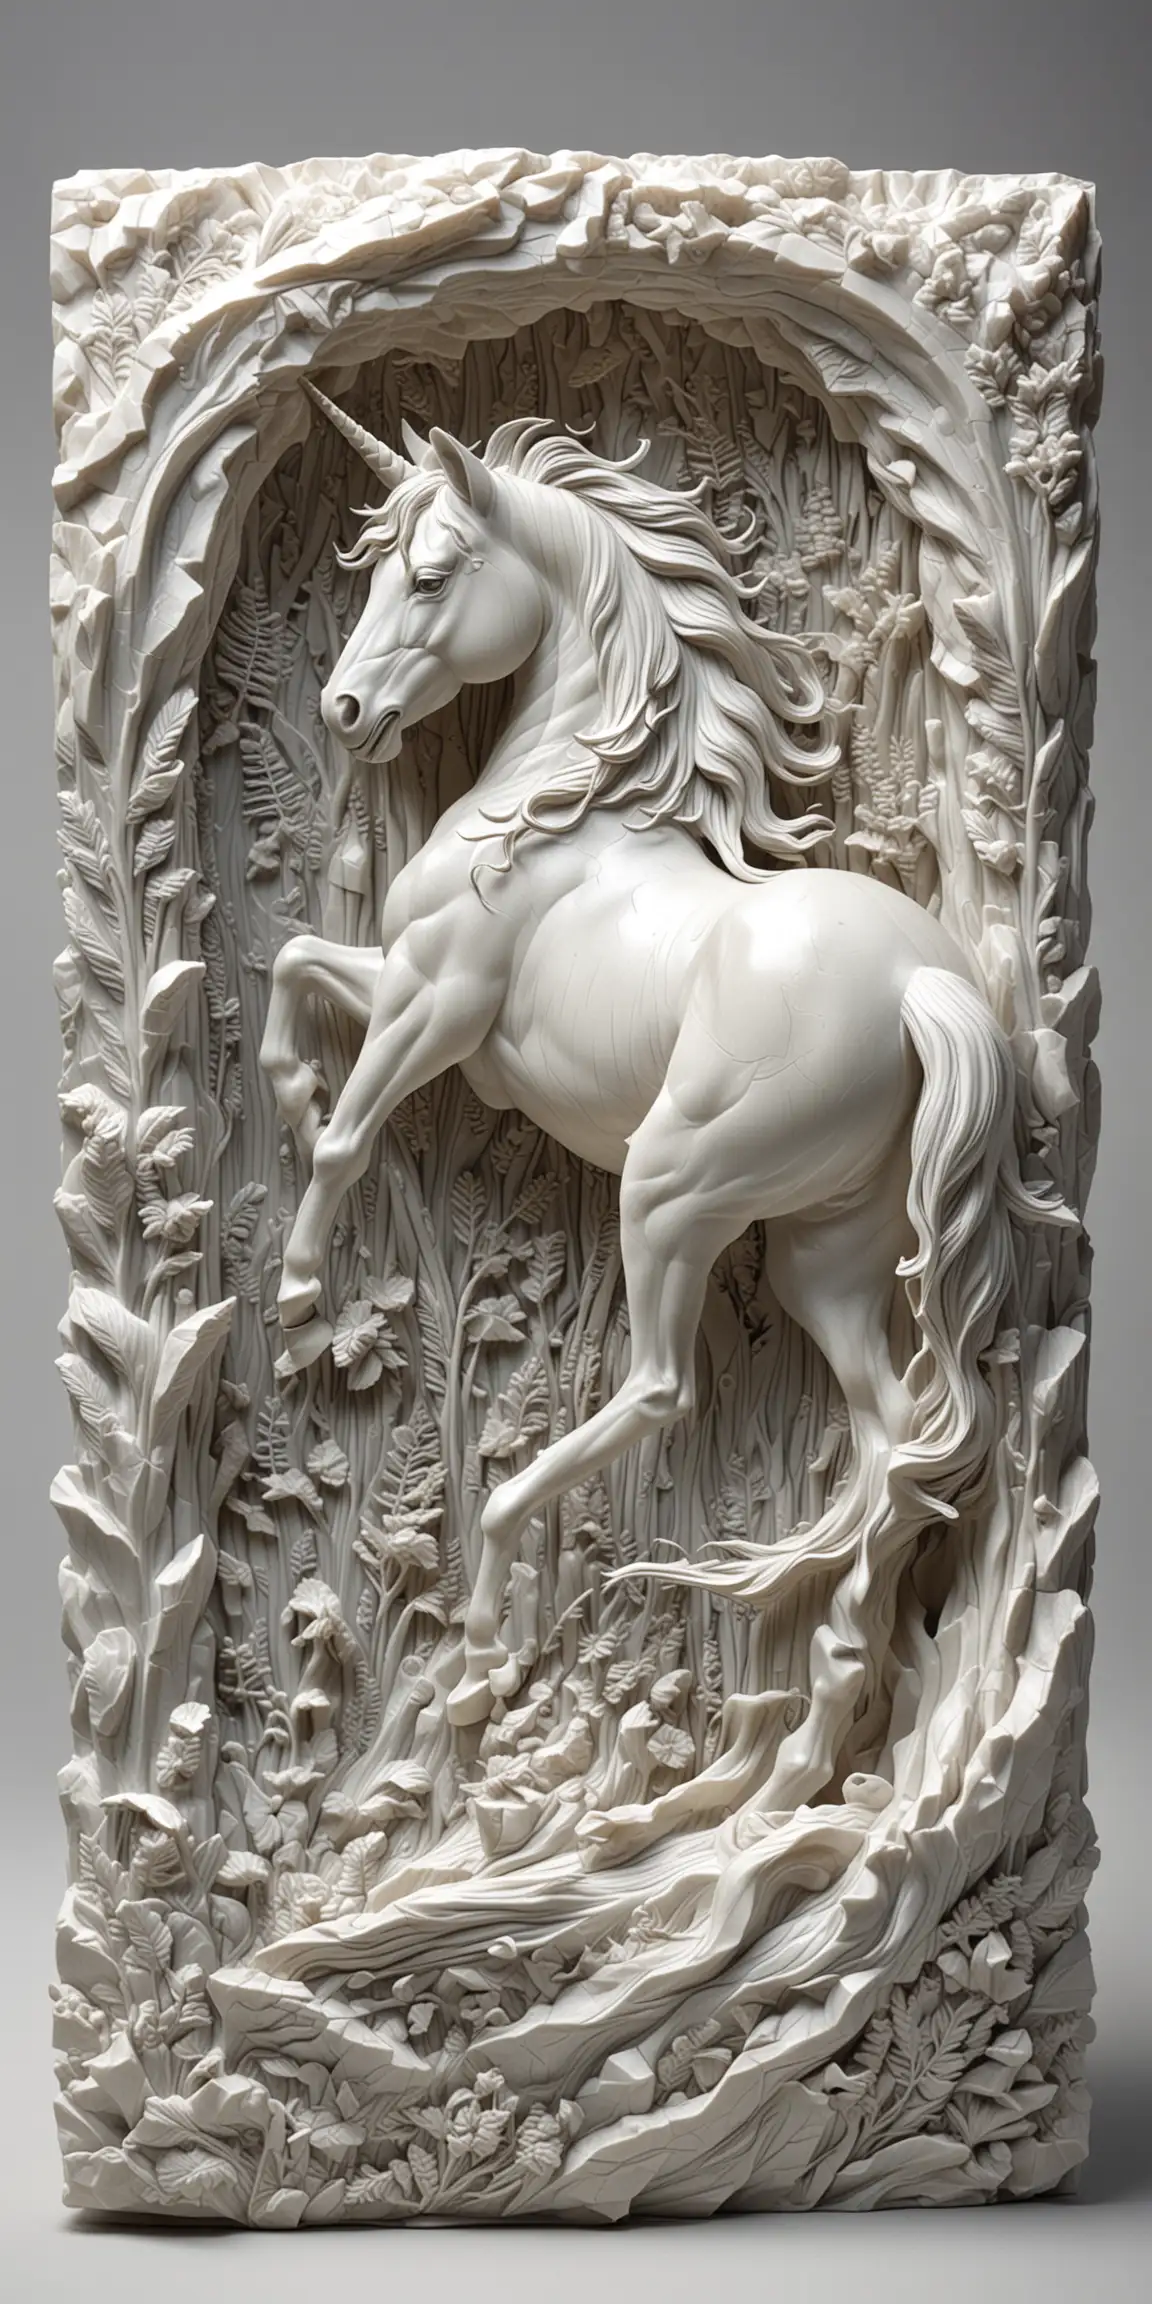 Ethereal Unicorn Carved in Translucent Alabaster 3D Relief Sculpture in Topographical Gray Scale